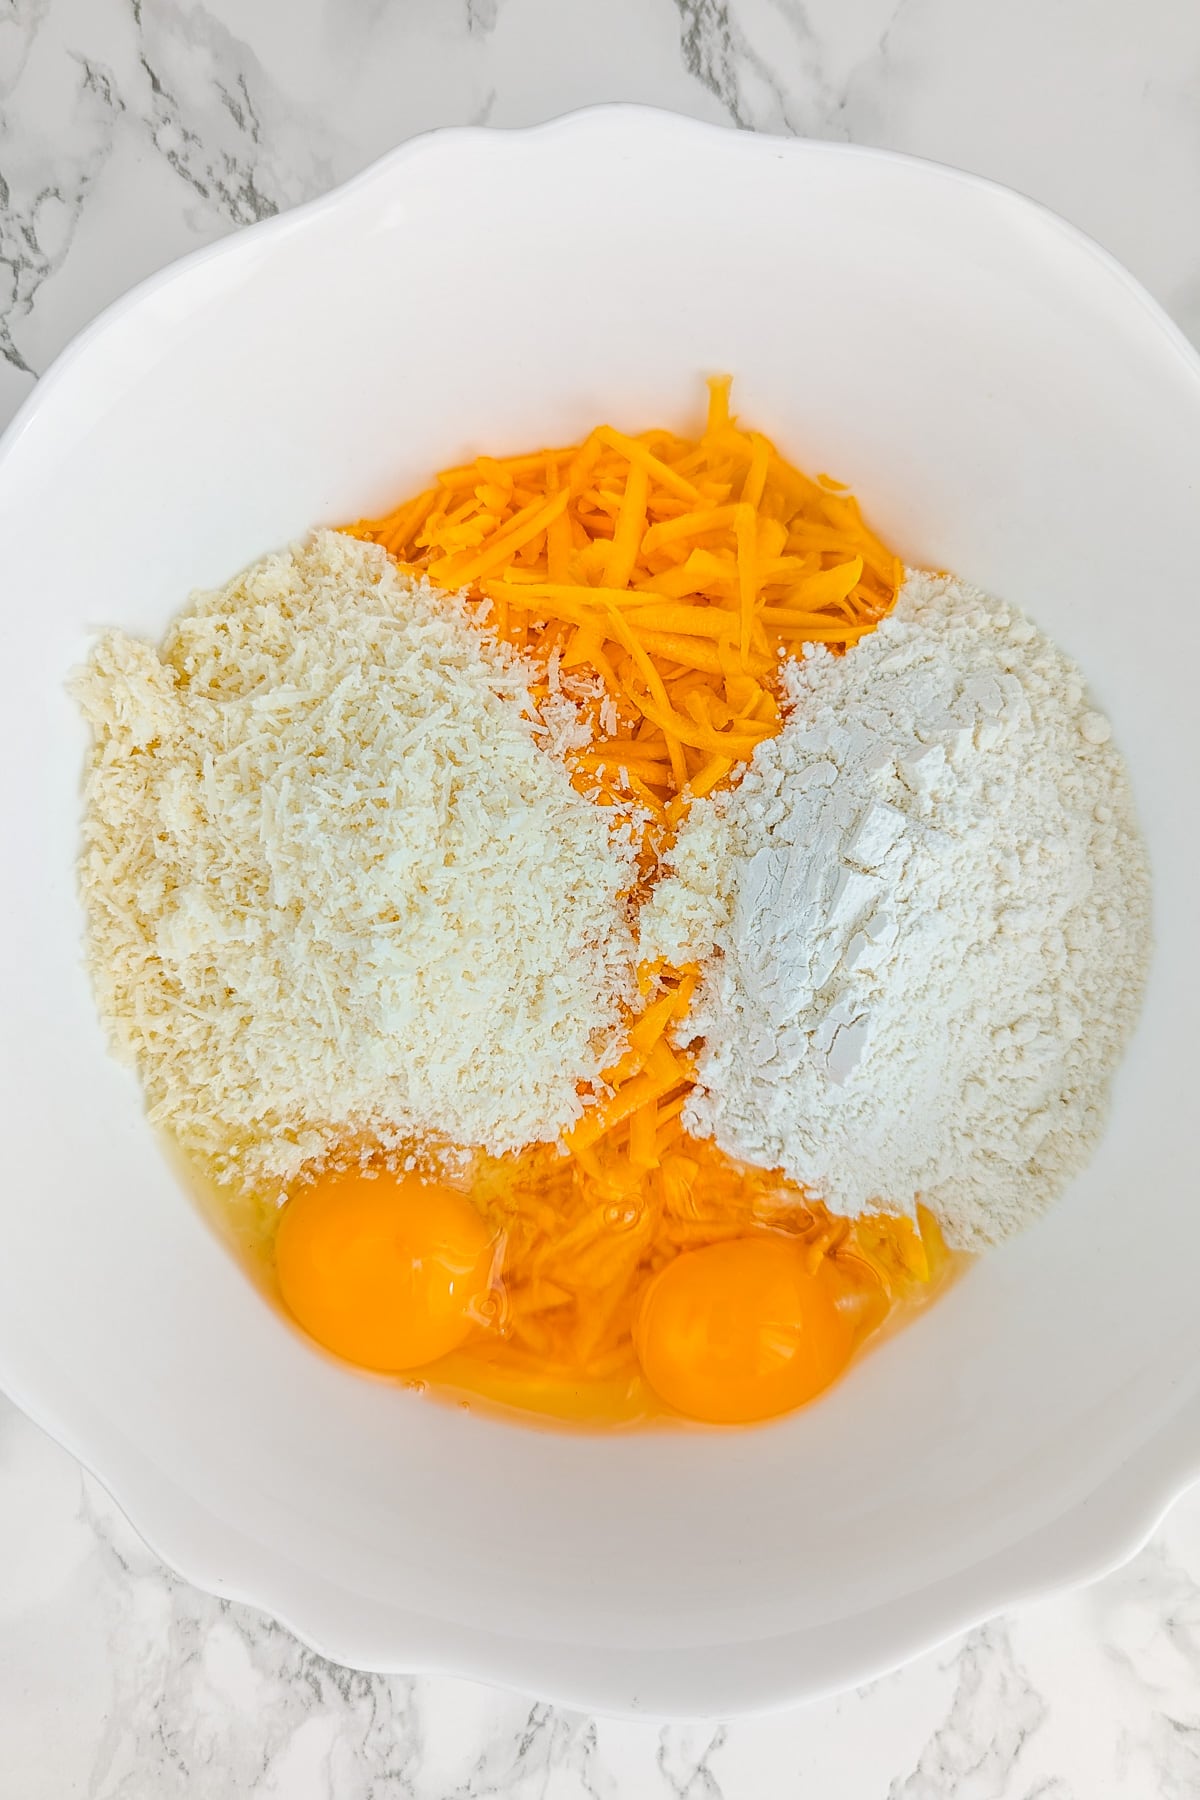 Grated pumpkin, eggs, parmesan and flour in a large white bowl.